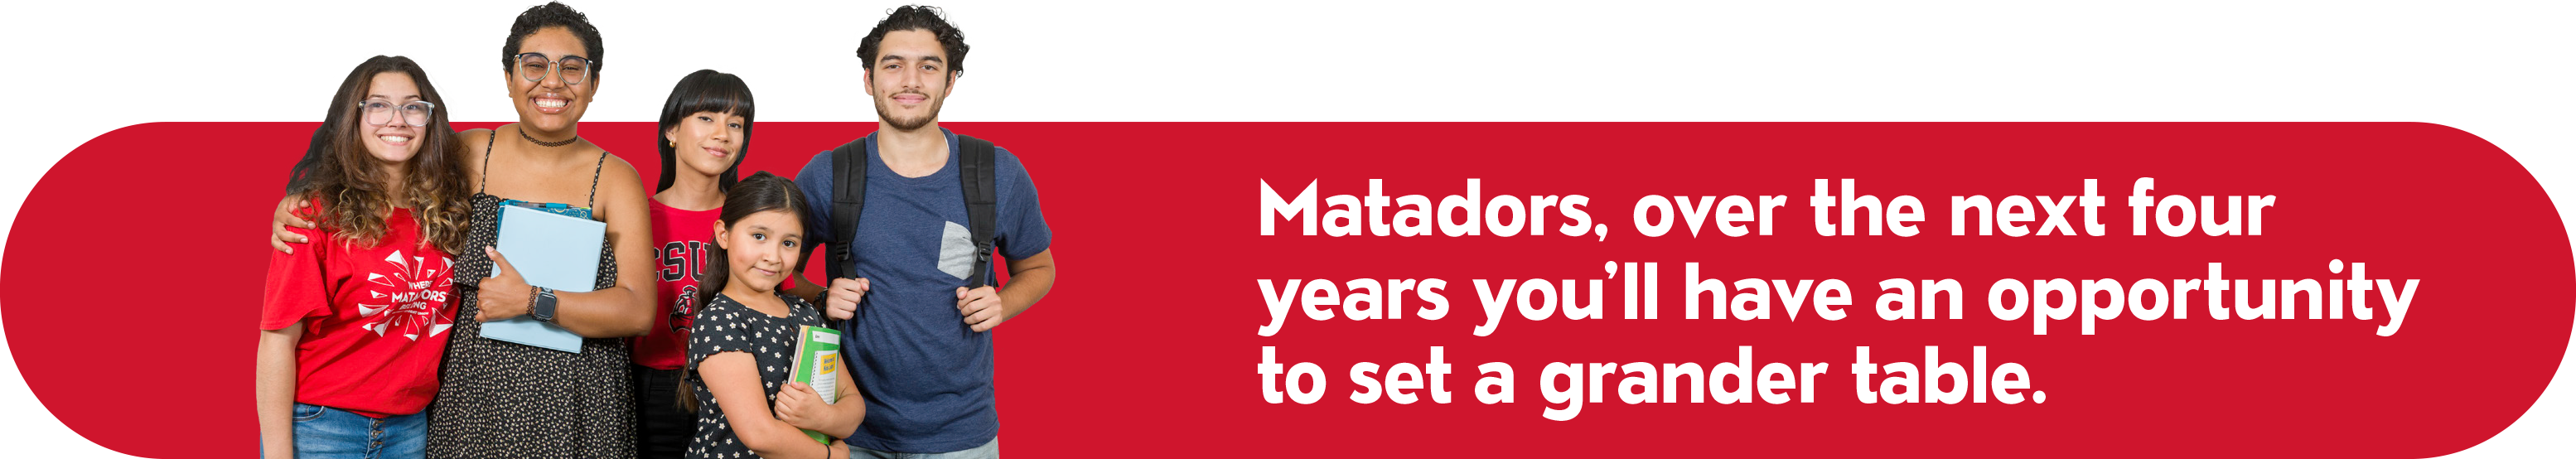 Matadors, over the next four years you'll have an opportunity to set a grander table.